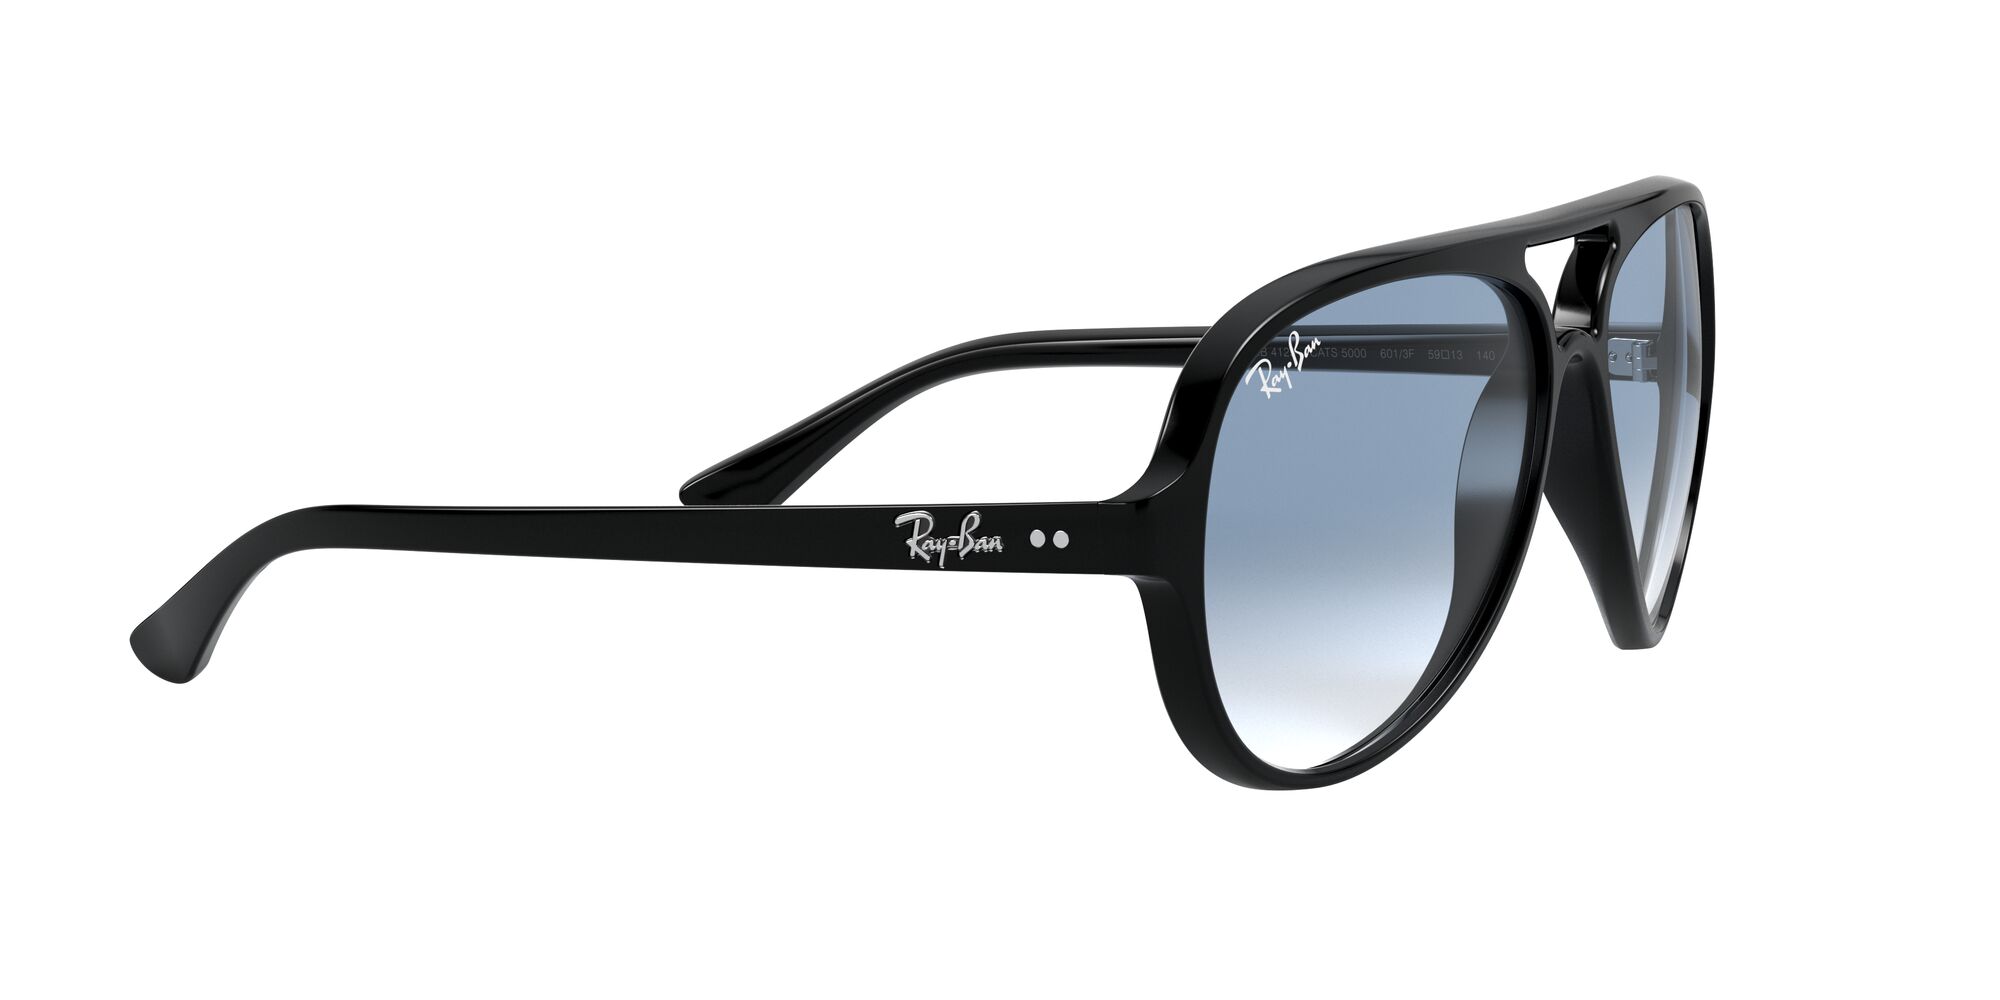 Ray-Ban RB4125 Cats 5000 Sunglasses - image 11 of 12